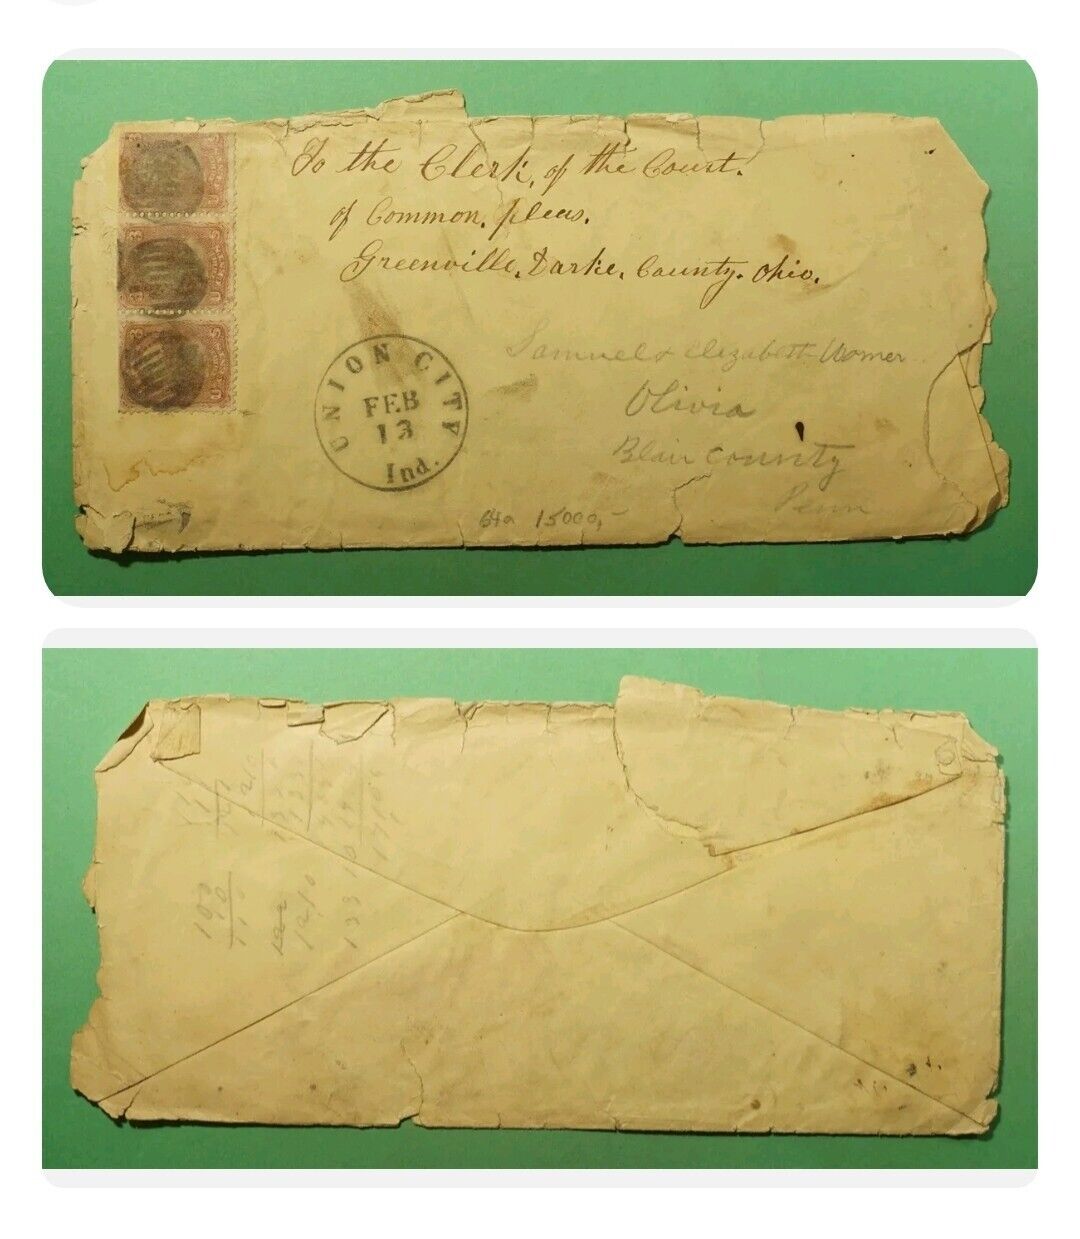  1860S CIVIL WAR UNION CITY CANCELED COVER TO GREENVILLE OH COURT CLERK..